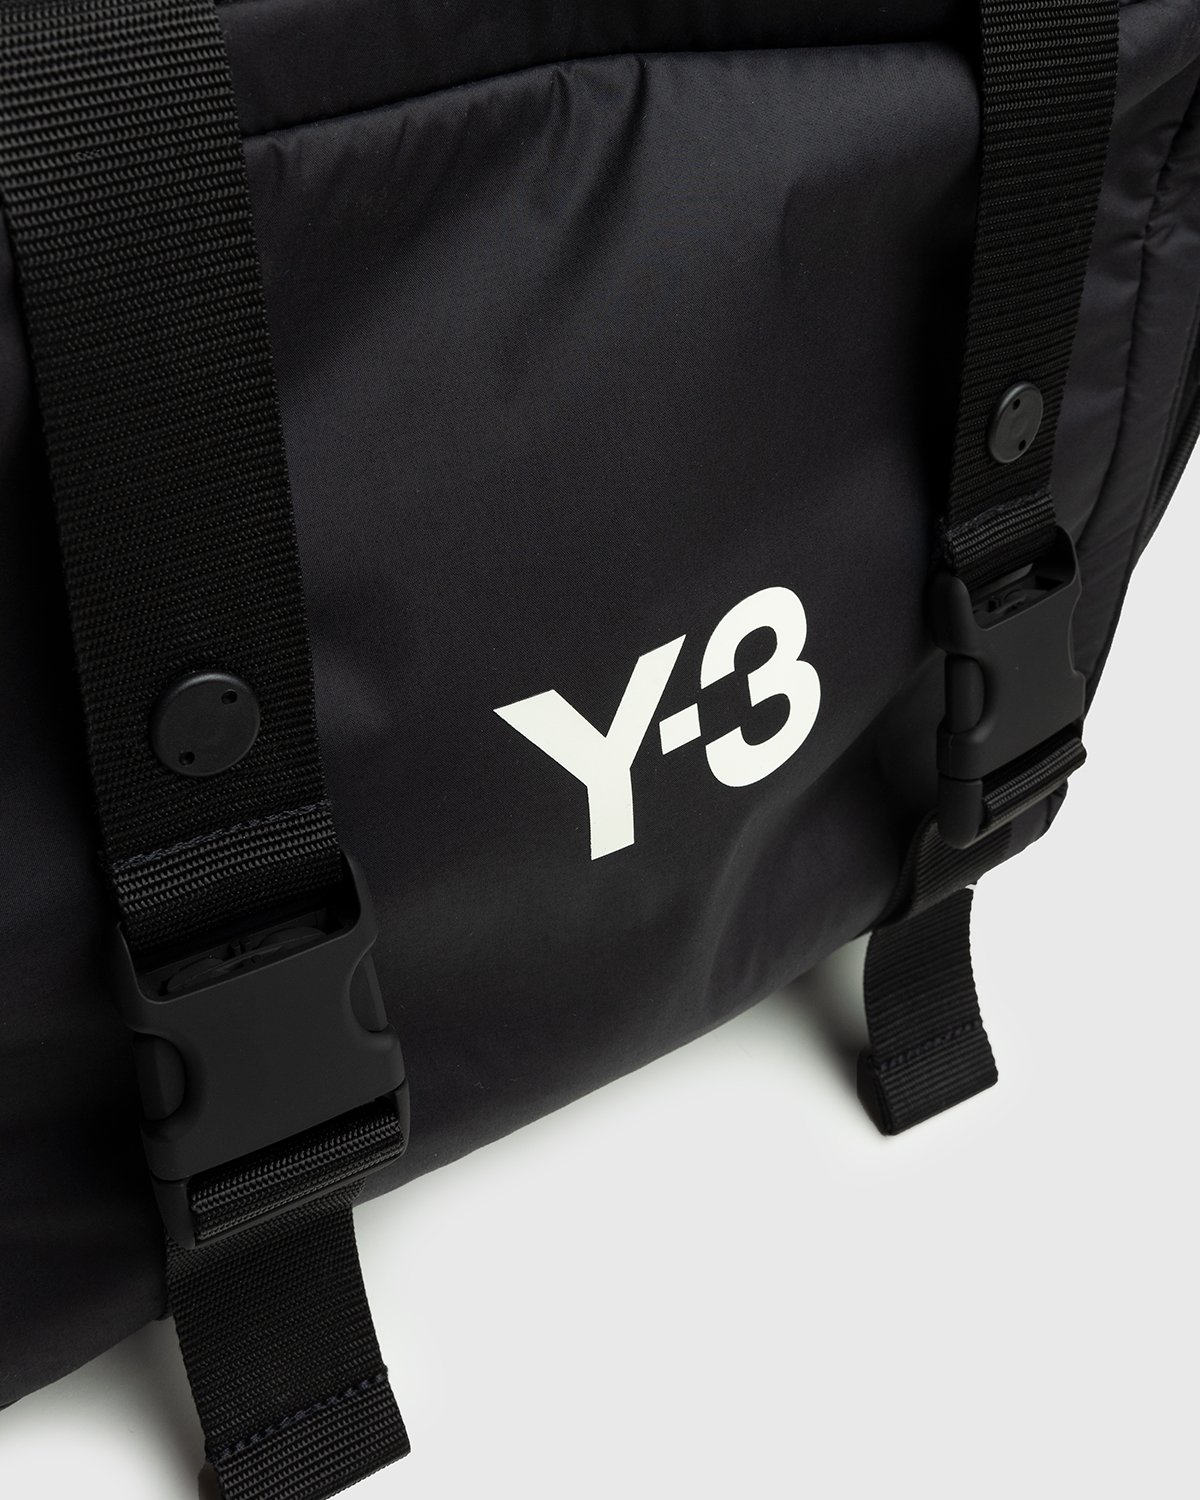 Y-3 - Mobile Archive Hold-All Duffle Bag Black - Accessories - Black - Image 4